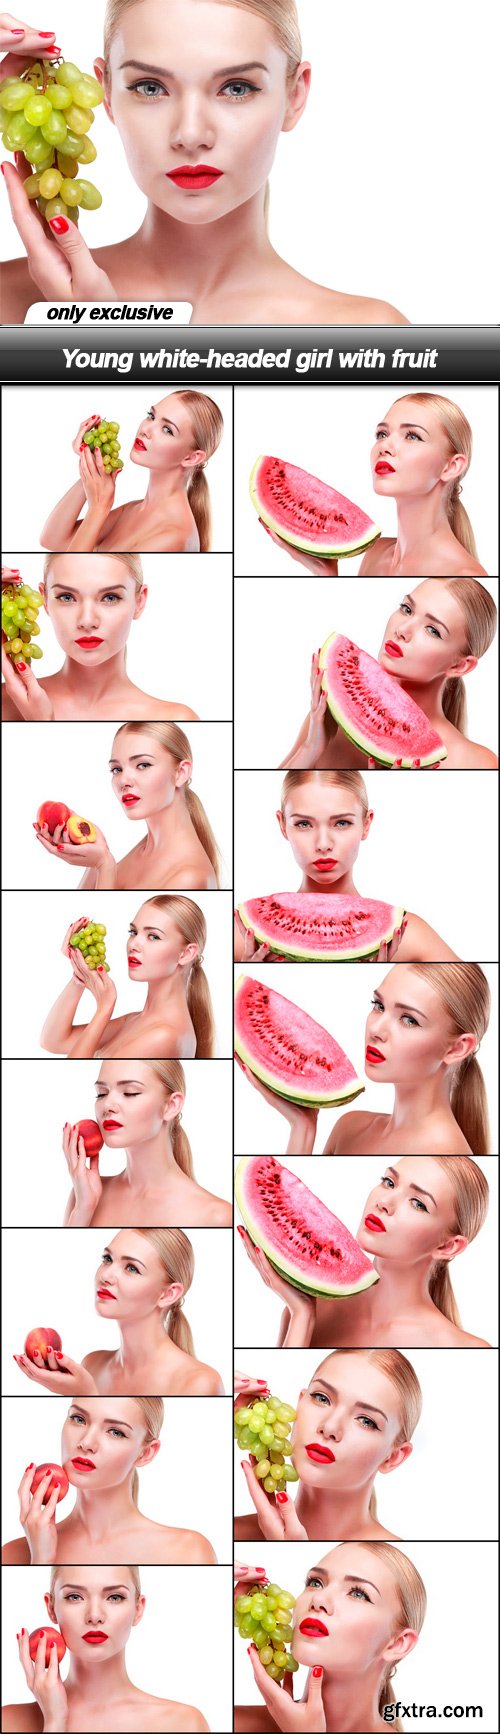 Young white-headed girl with fruit - 15 UHQ JPEG